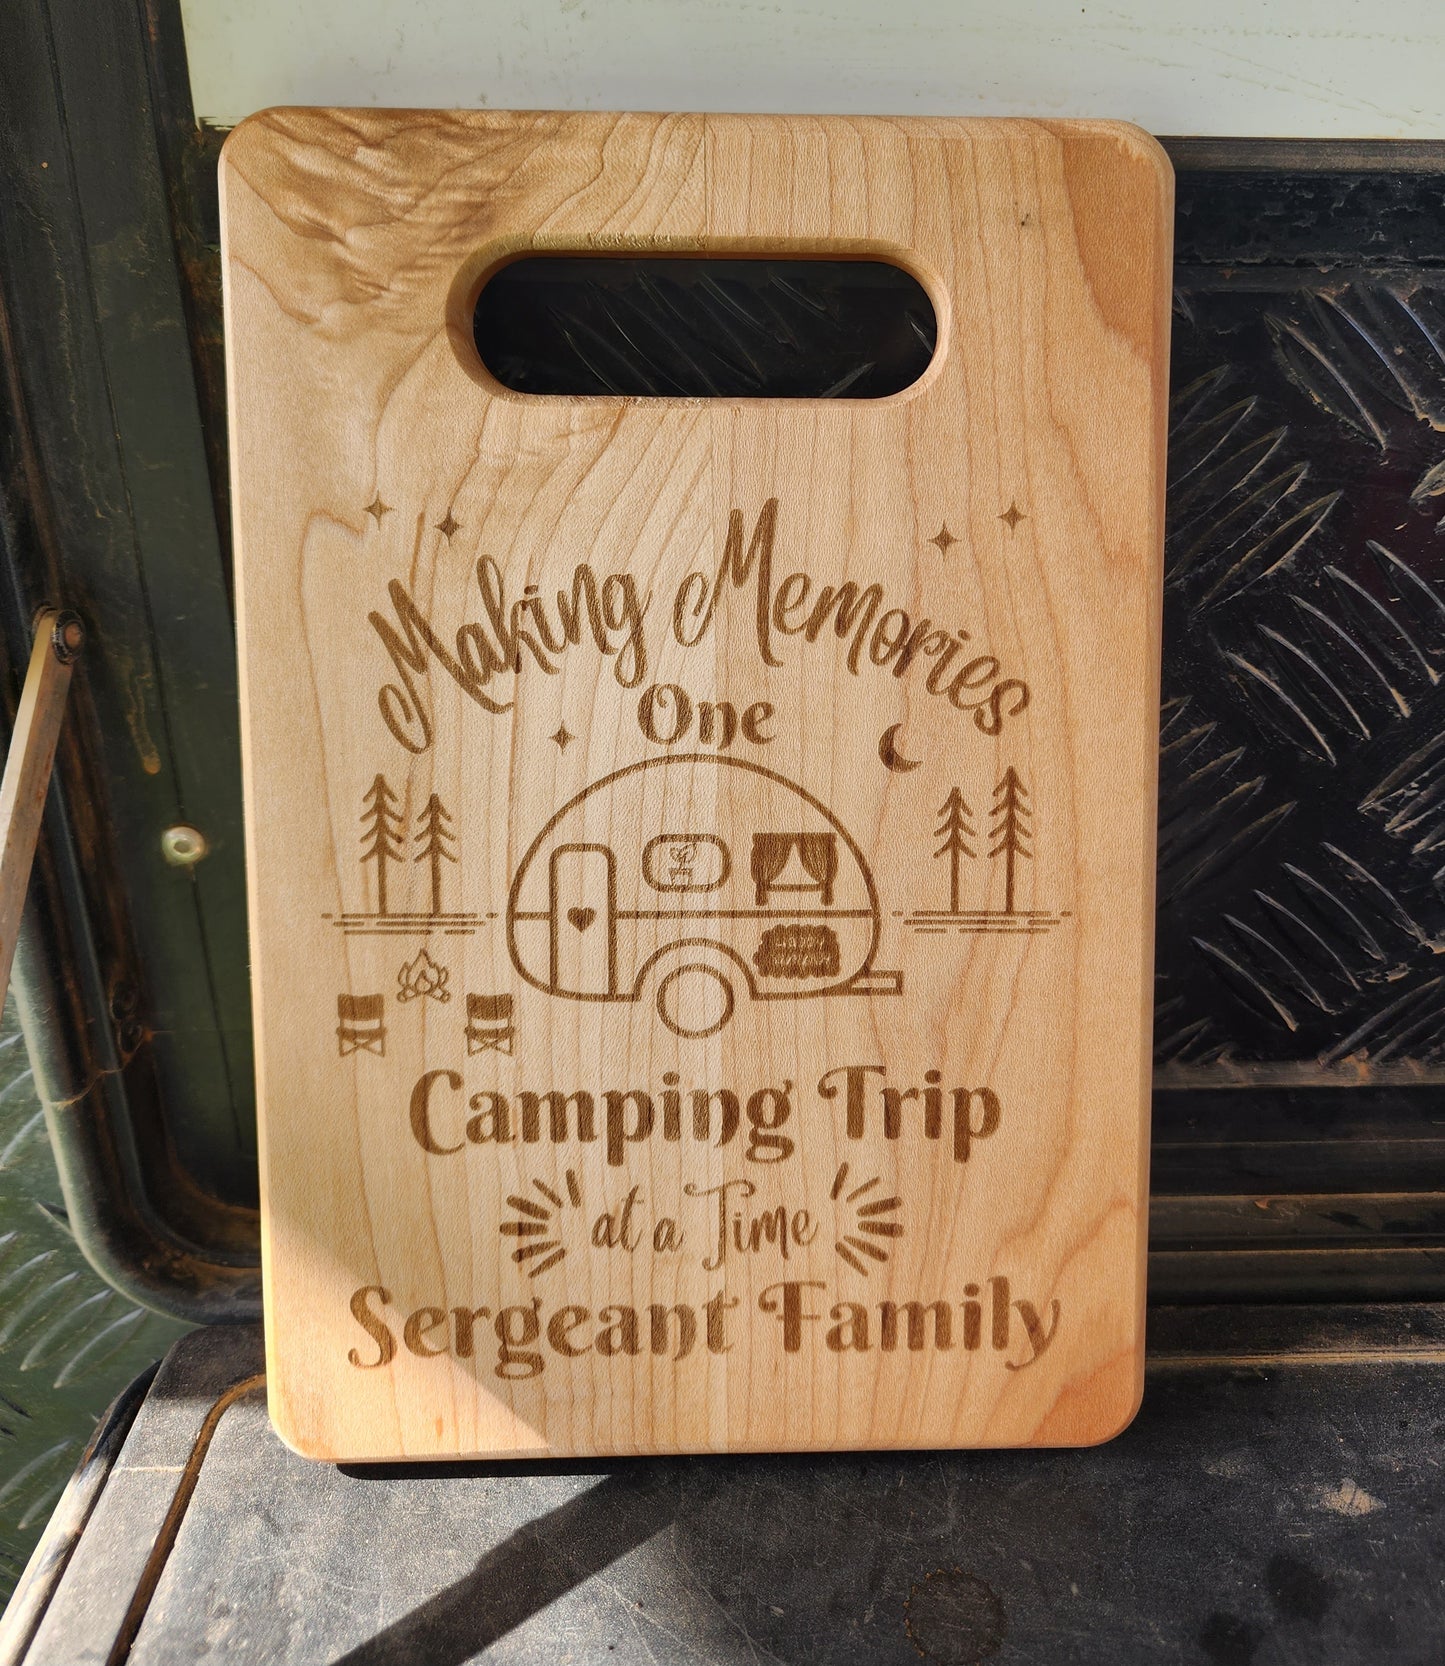 Making Memories One Camping Trip at a Time Maple Cutting Cheese Board with Family Name/Surname, Camping Gear, Caravan RV Accessories, Gift for Campers